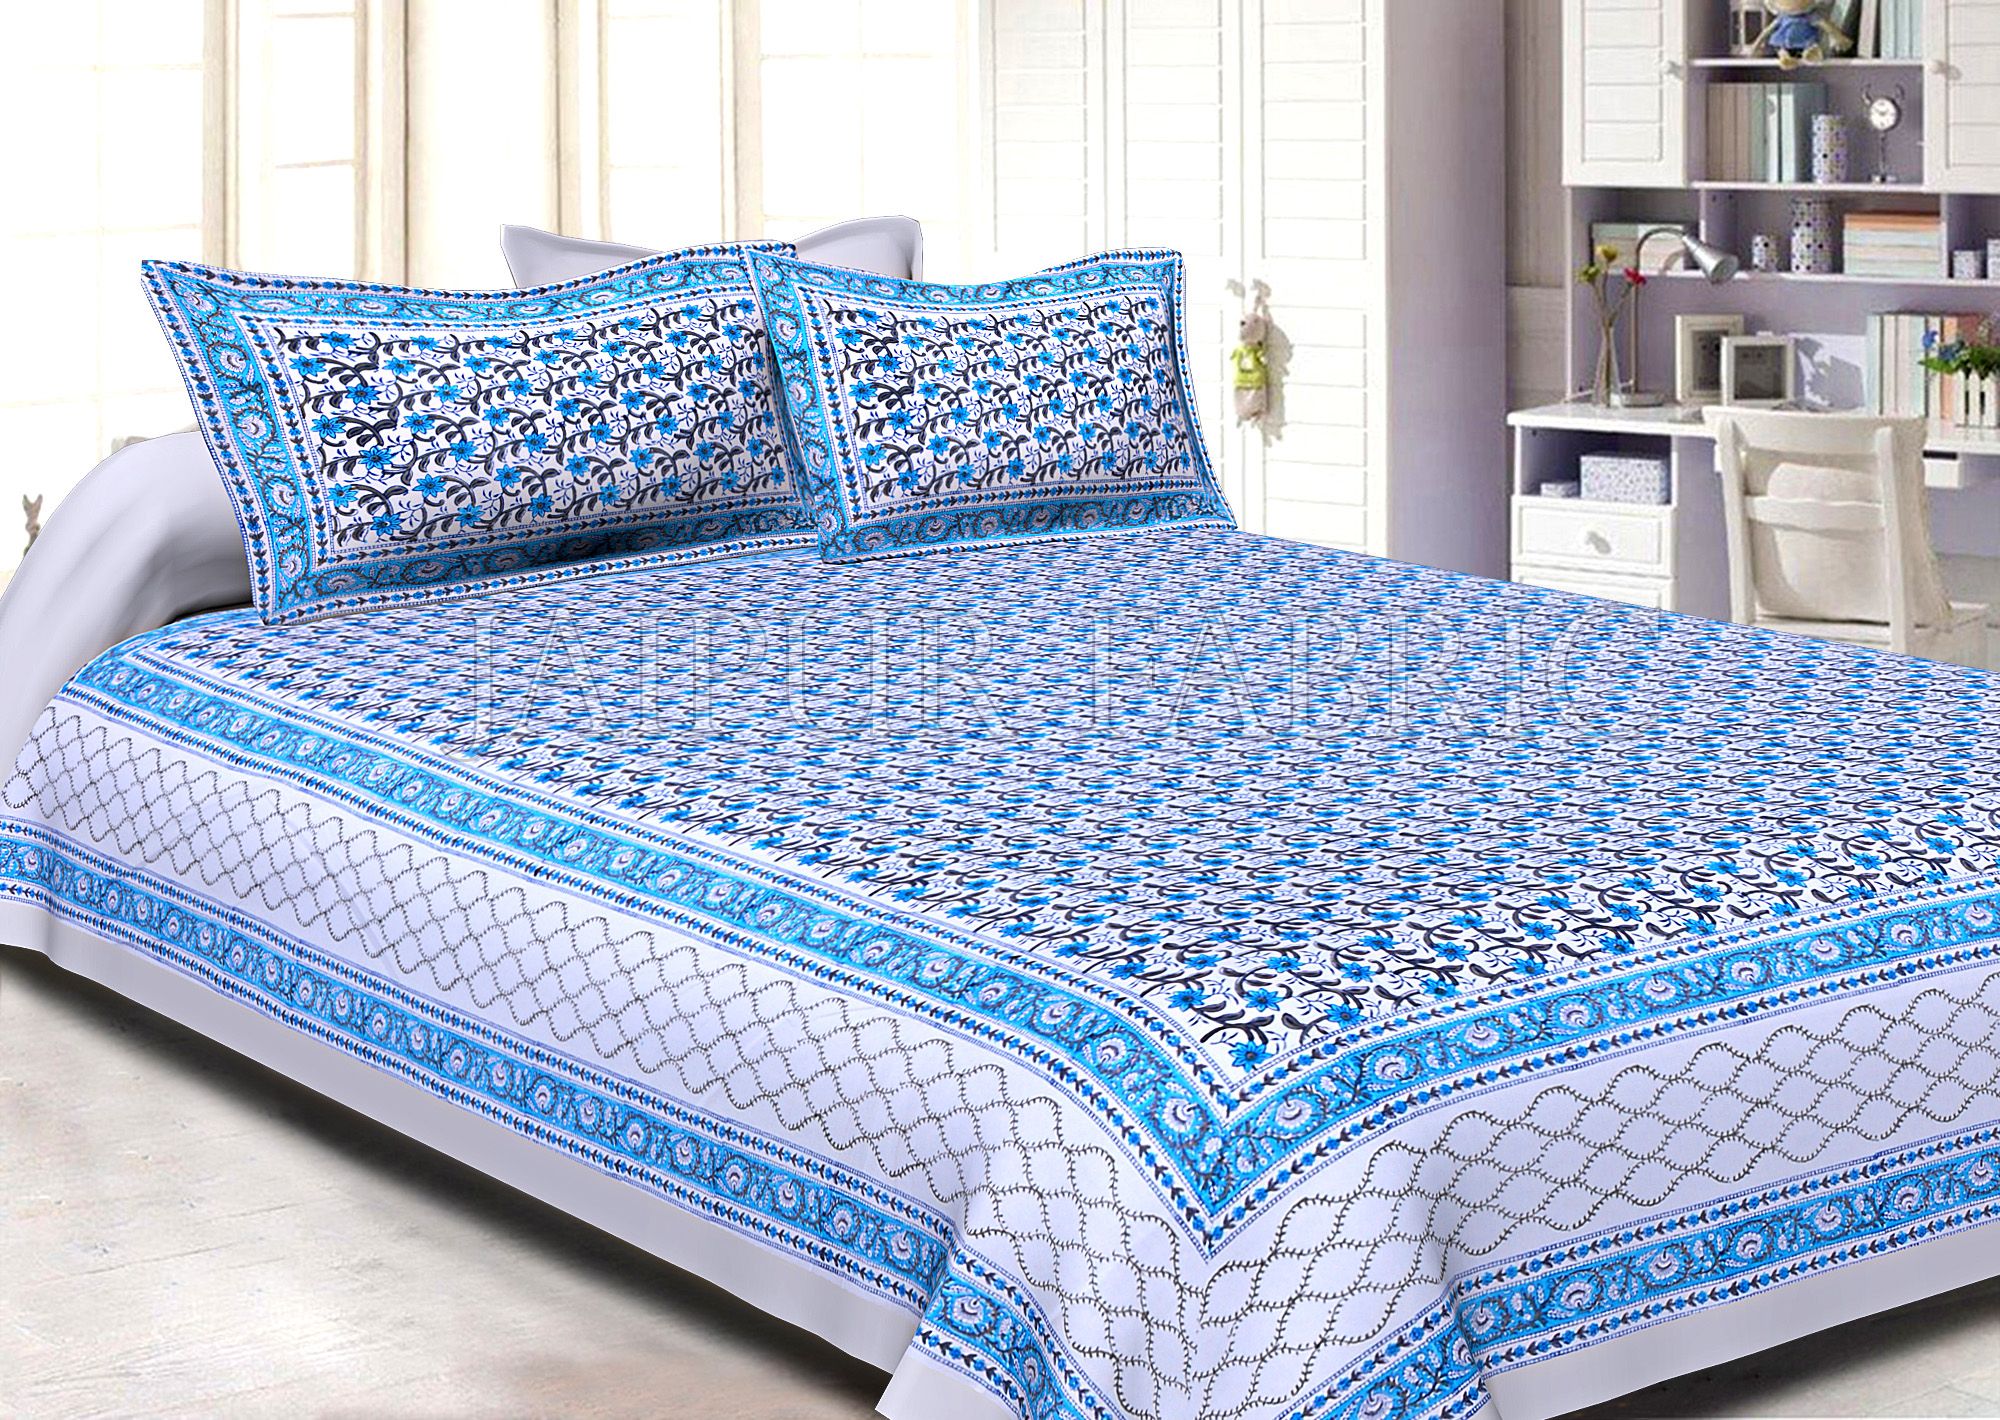 White Base White Blue Border Small Blue Flower With Black Leaf Pattern Hand Block Print Super Fine Cotton Double Bed Sheet